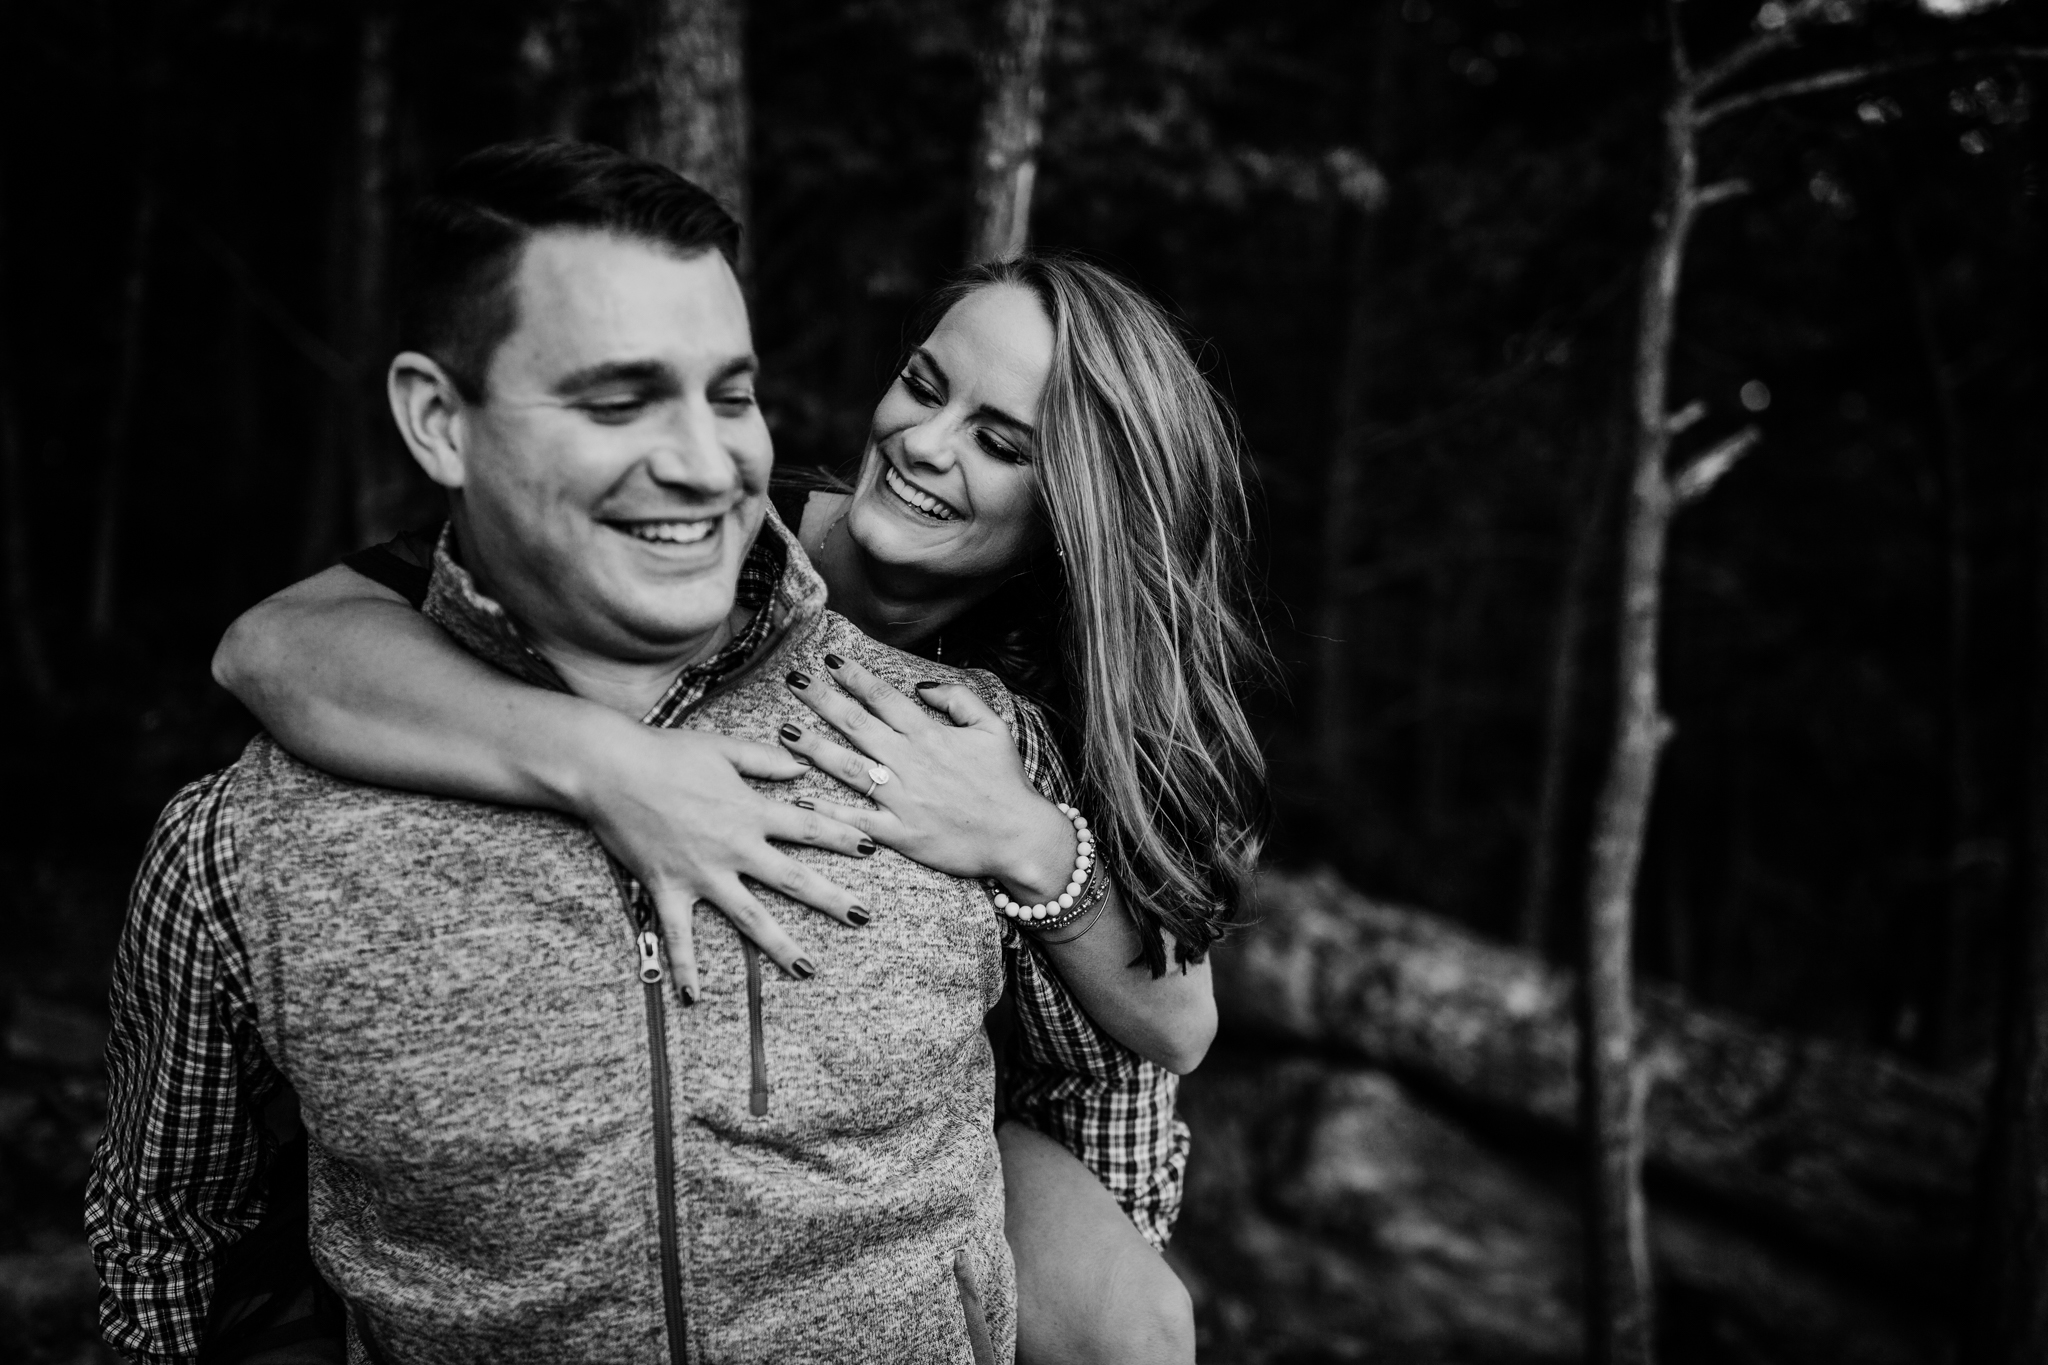 A fall New River Gorge Adventure Engagement Session on Endless Wall Trail. I can’t wait to shoot these two’s West Virginia wedding in downtown Charleston next year!